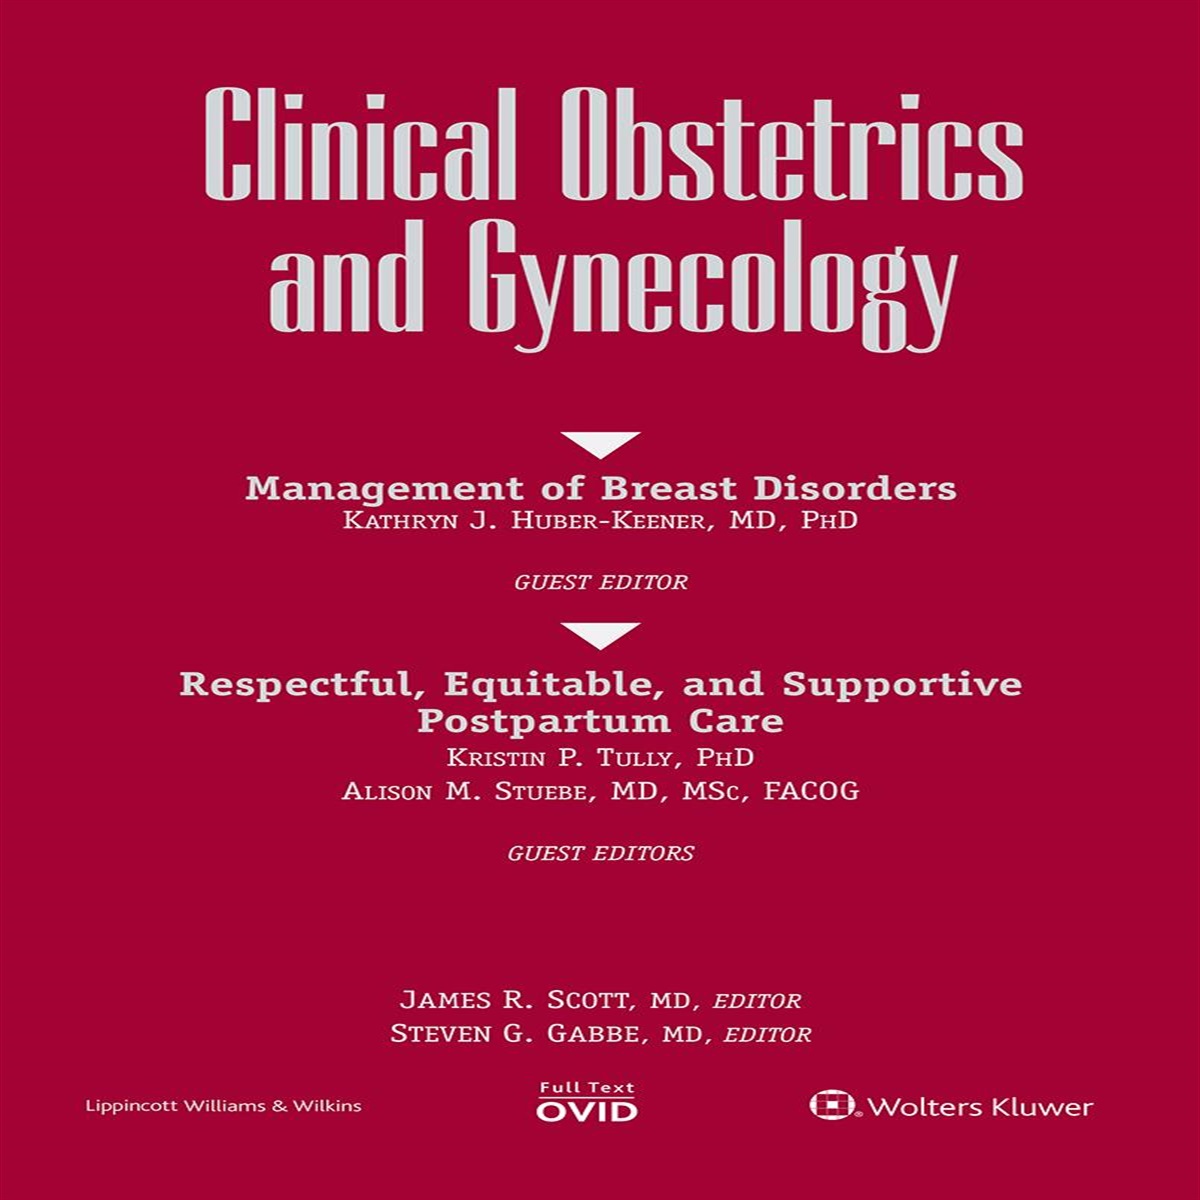 Contributors: Management of Breast Disorders